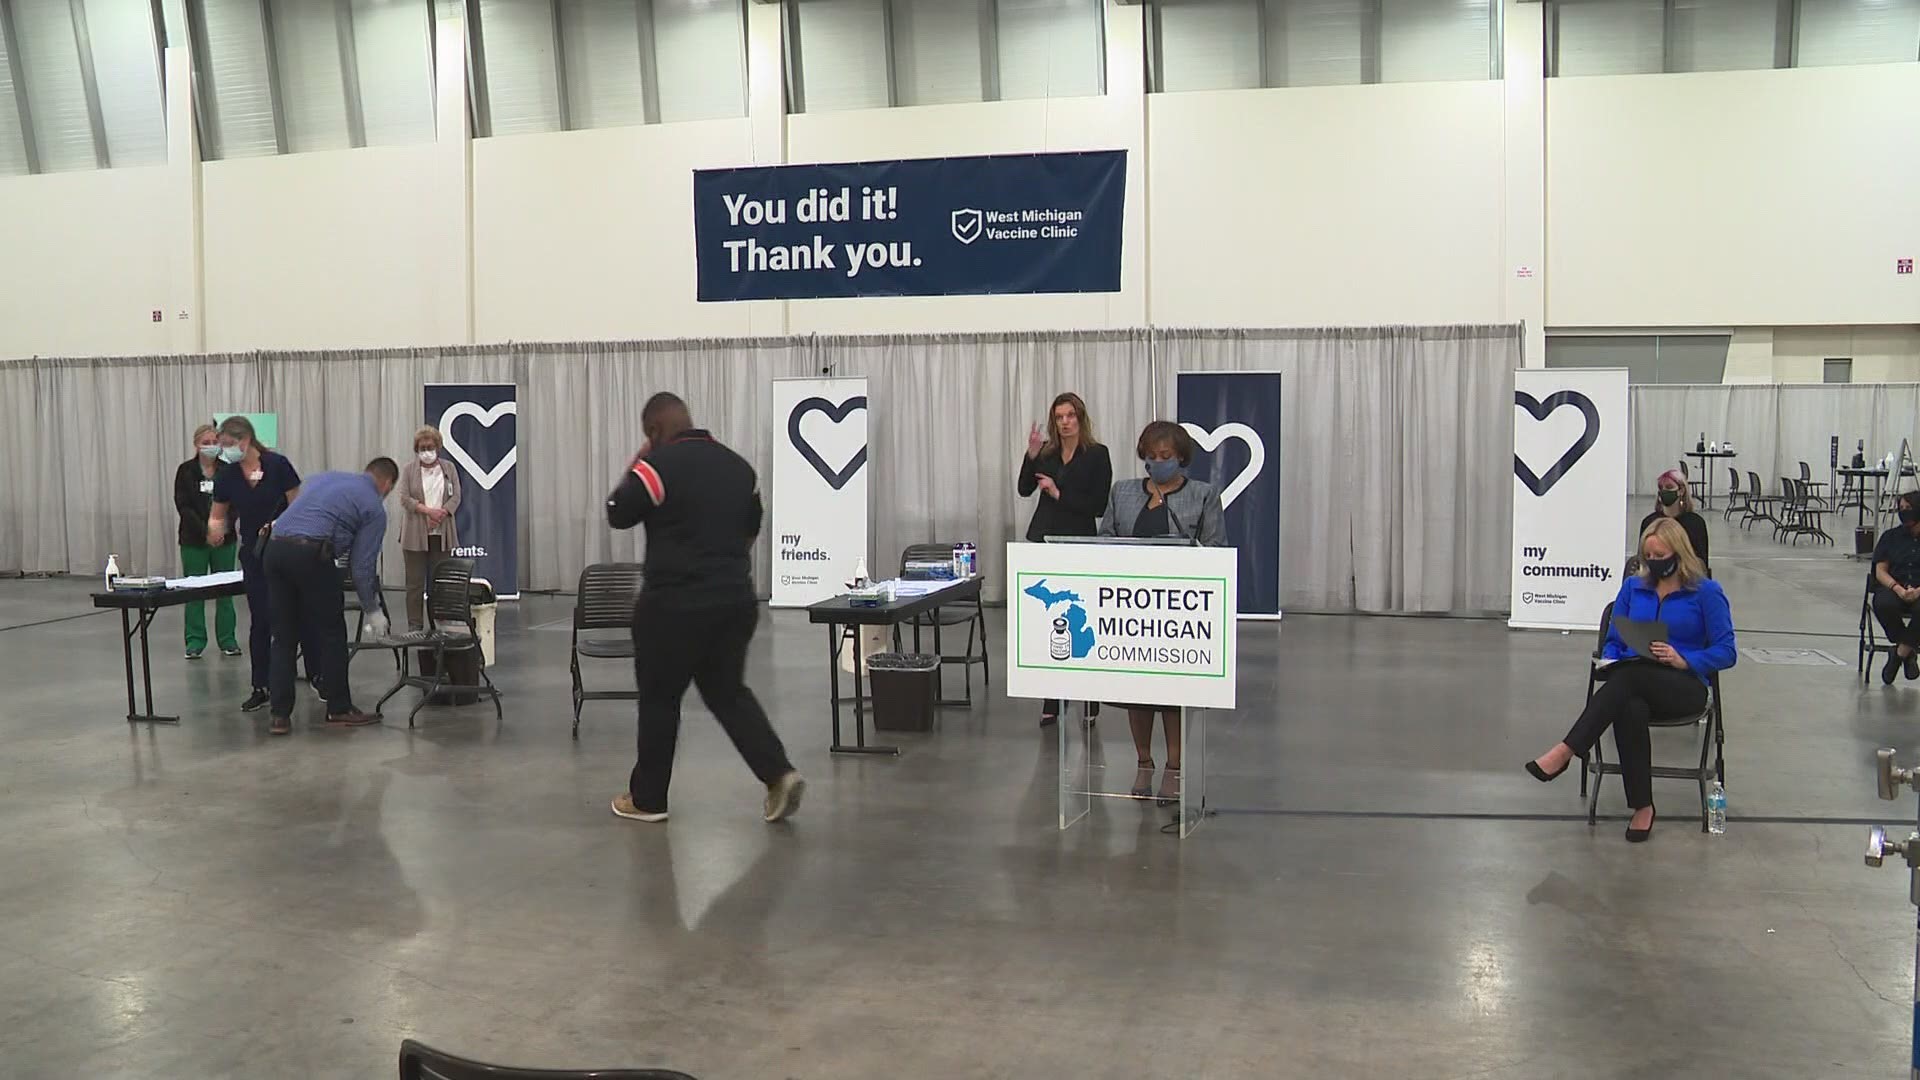 Six Grand Rapids Public school students joined Gov. Whitmer on Thursday, April 29 at DeVos Place, where they received their first dose of the Pfizer vaccine.